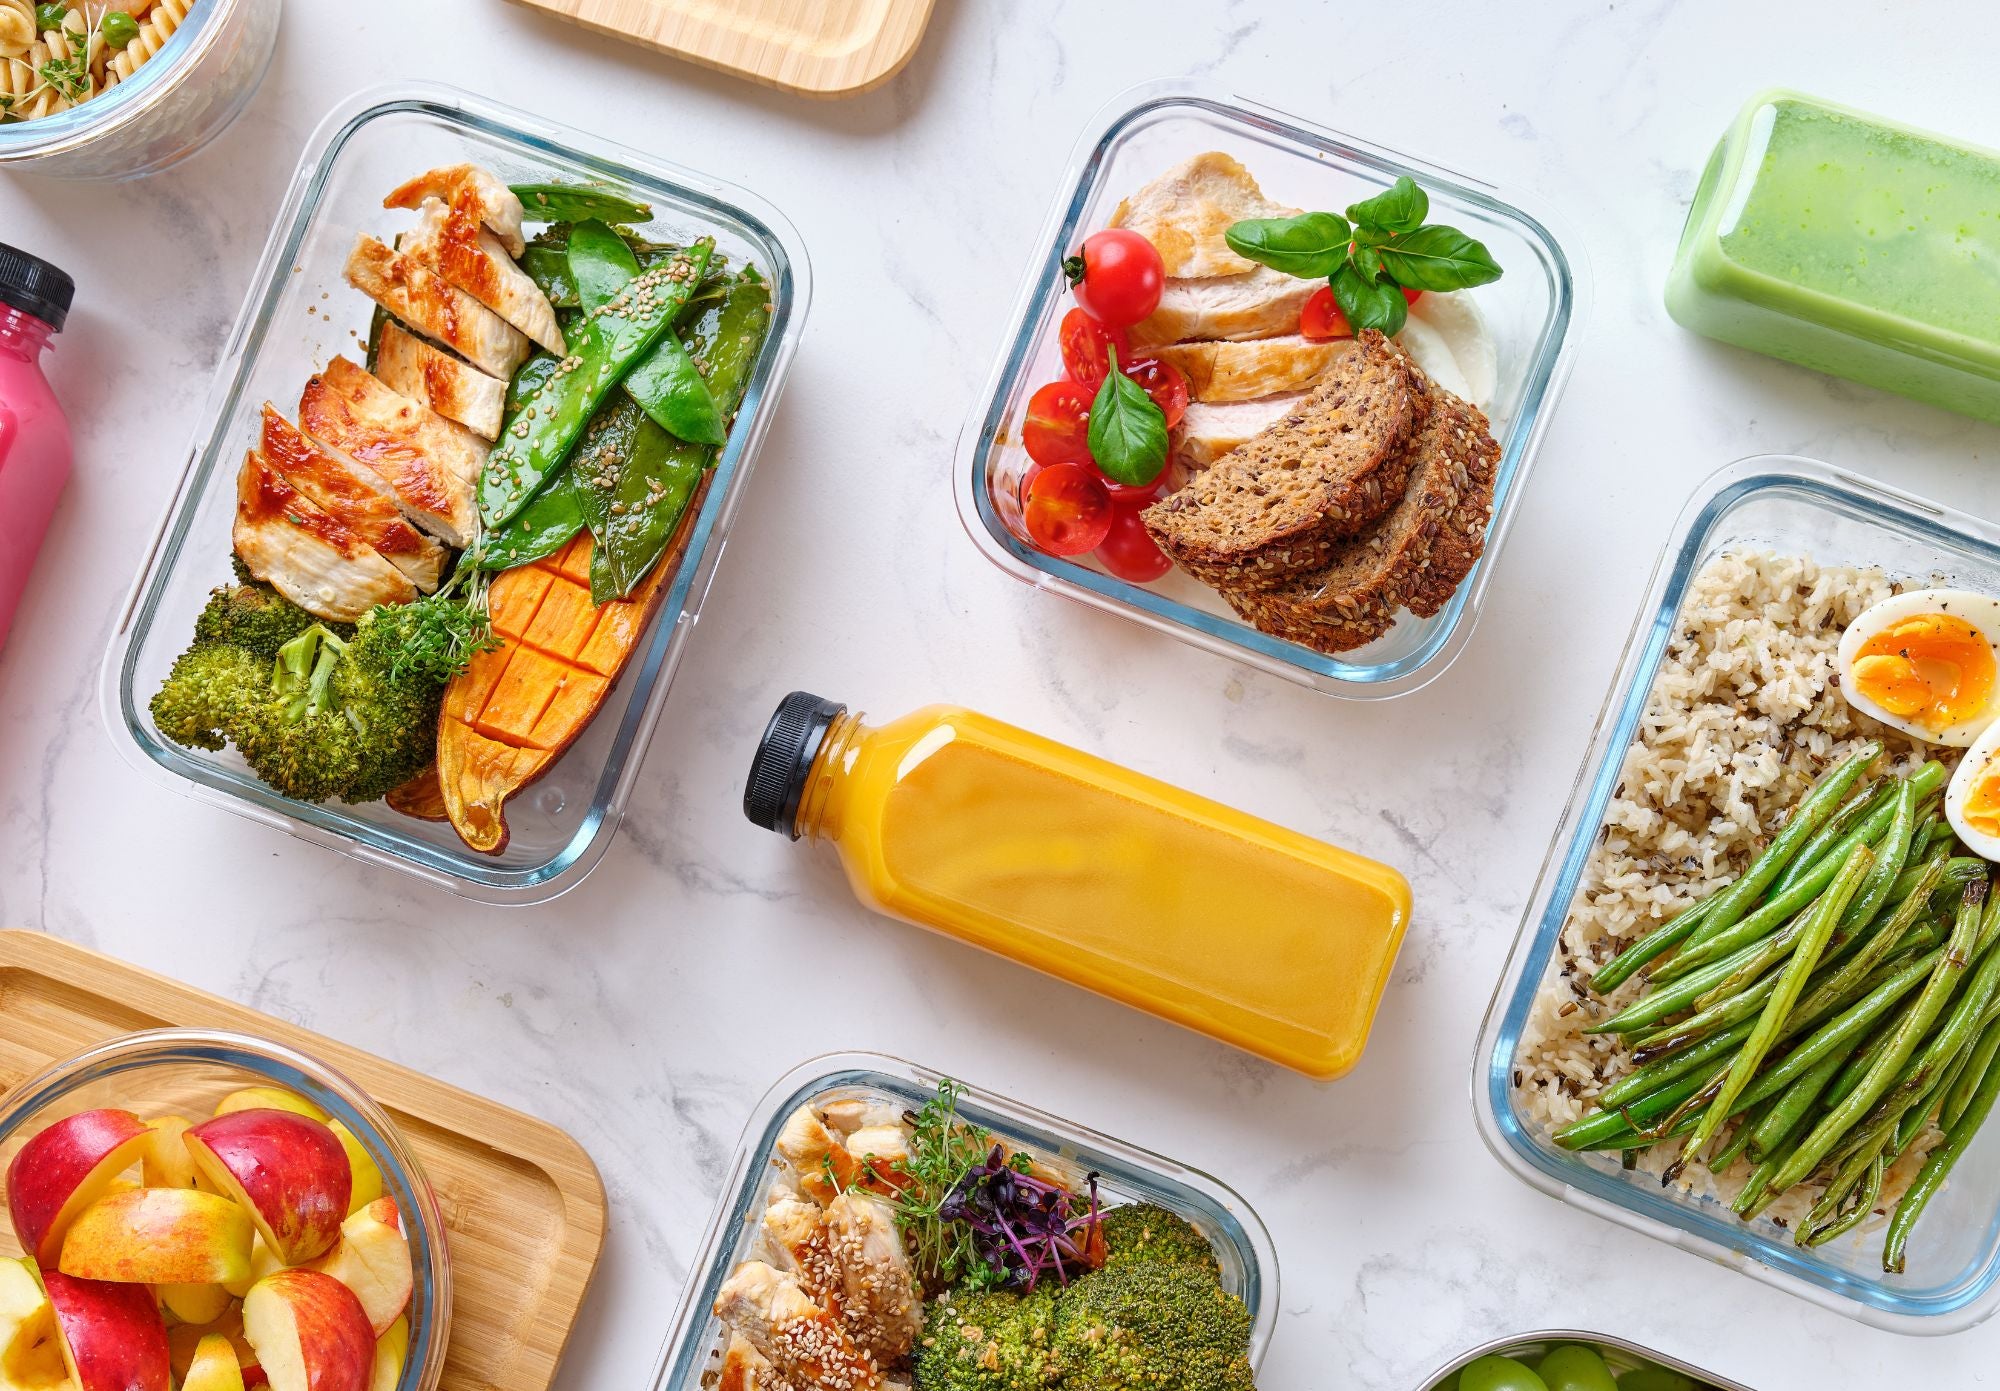 The Benefits of Meal Planning for a Healthy Lifestyle